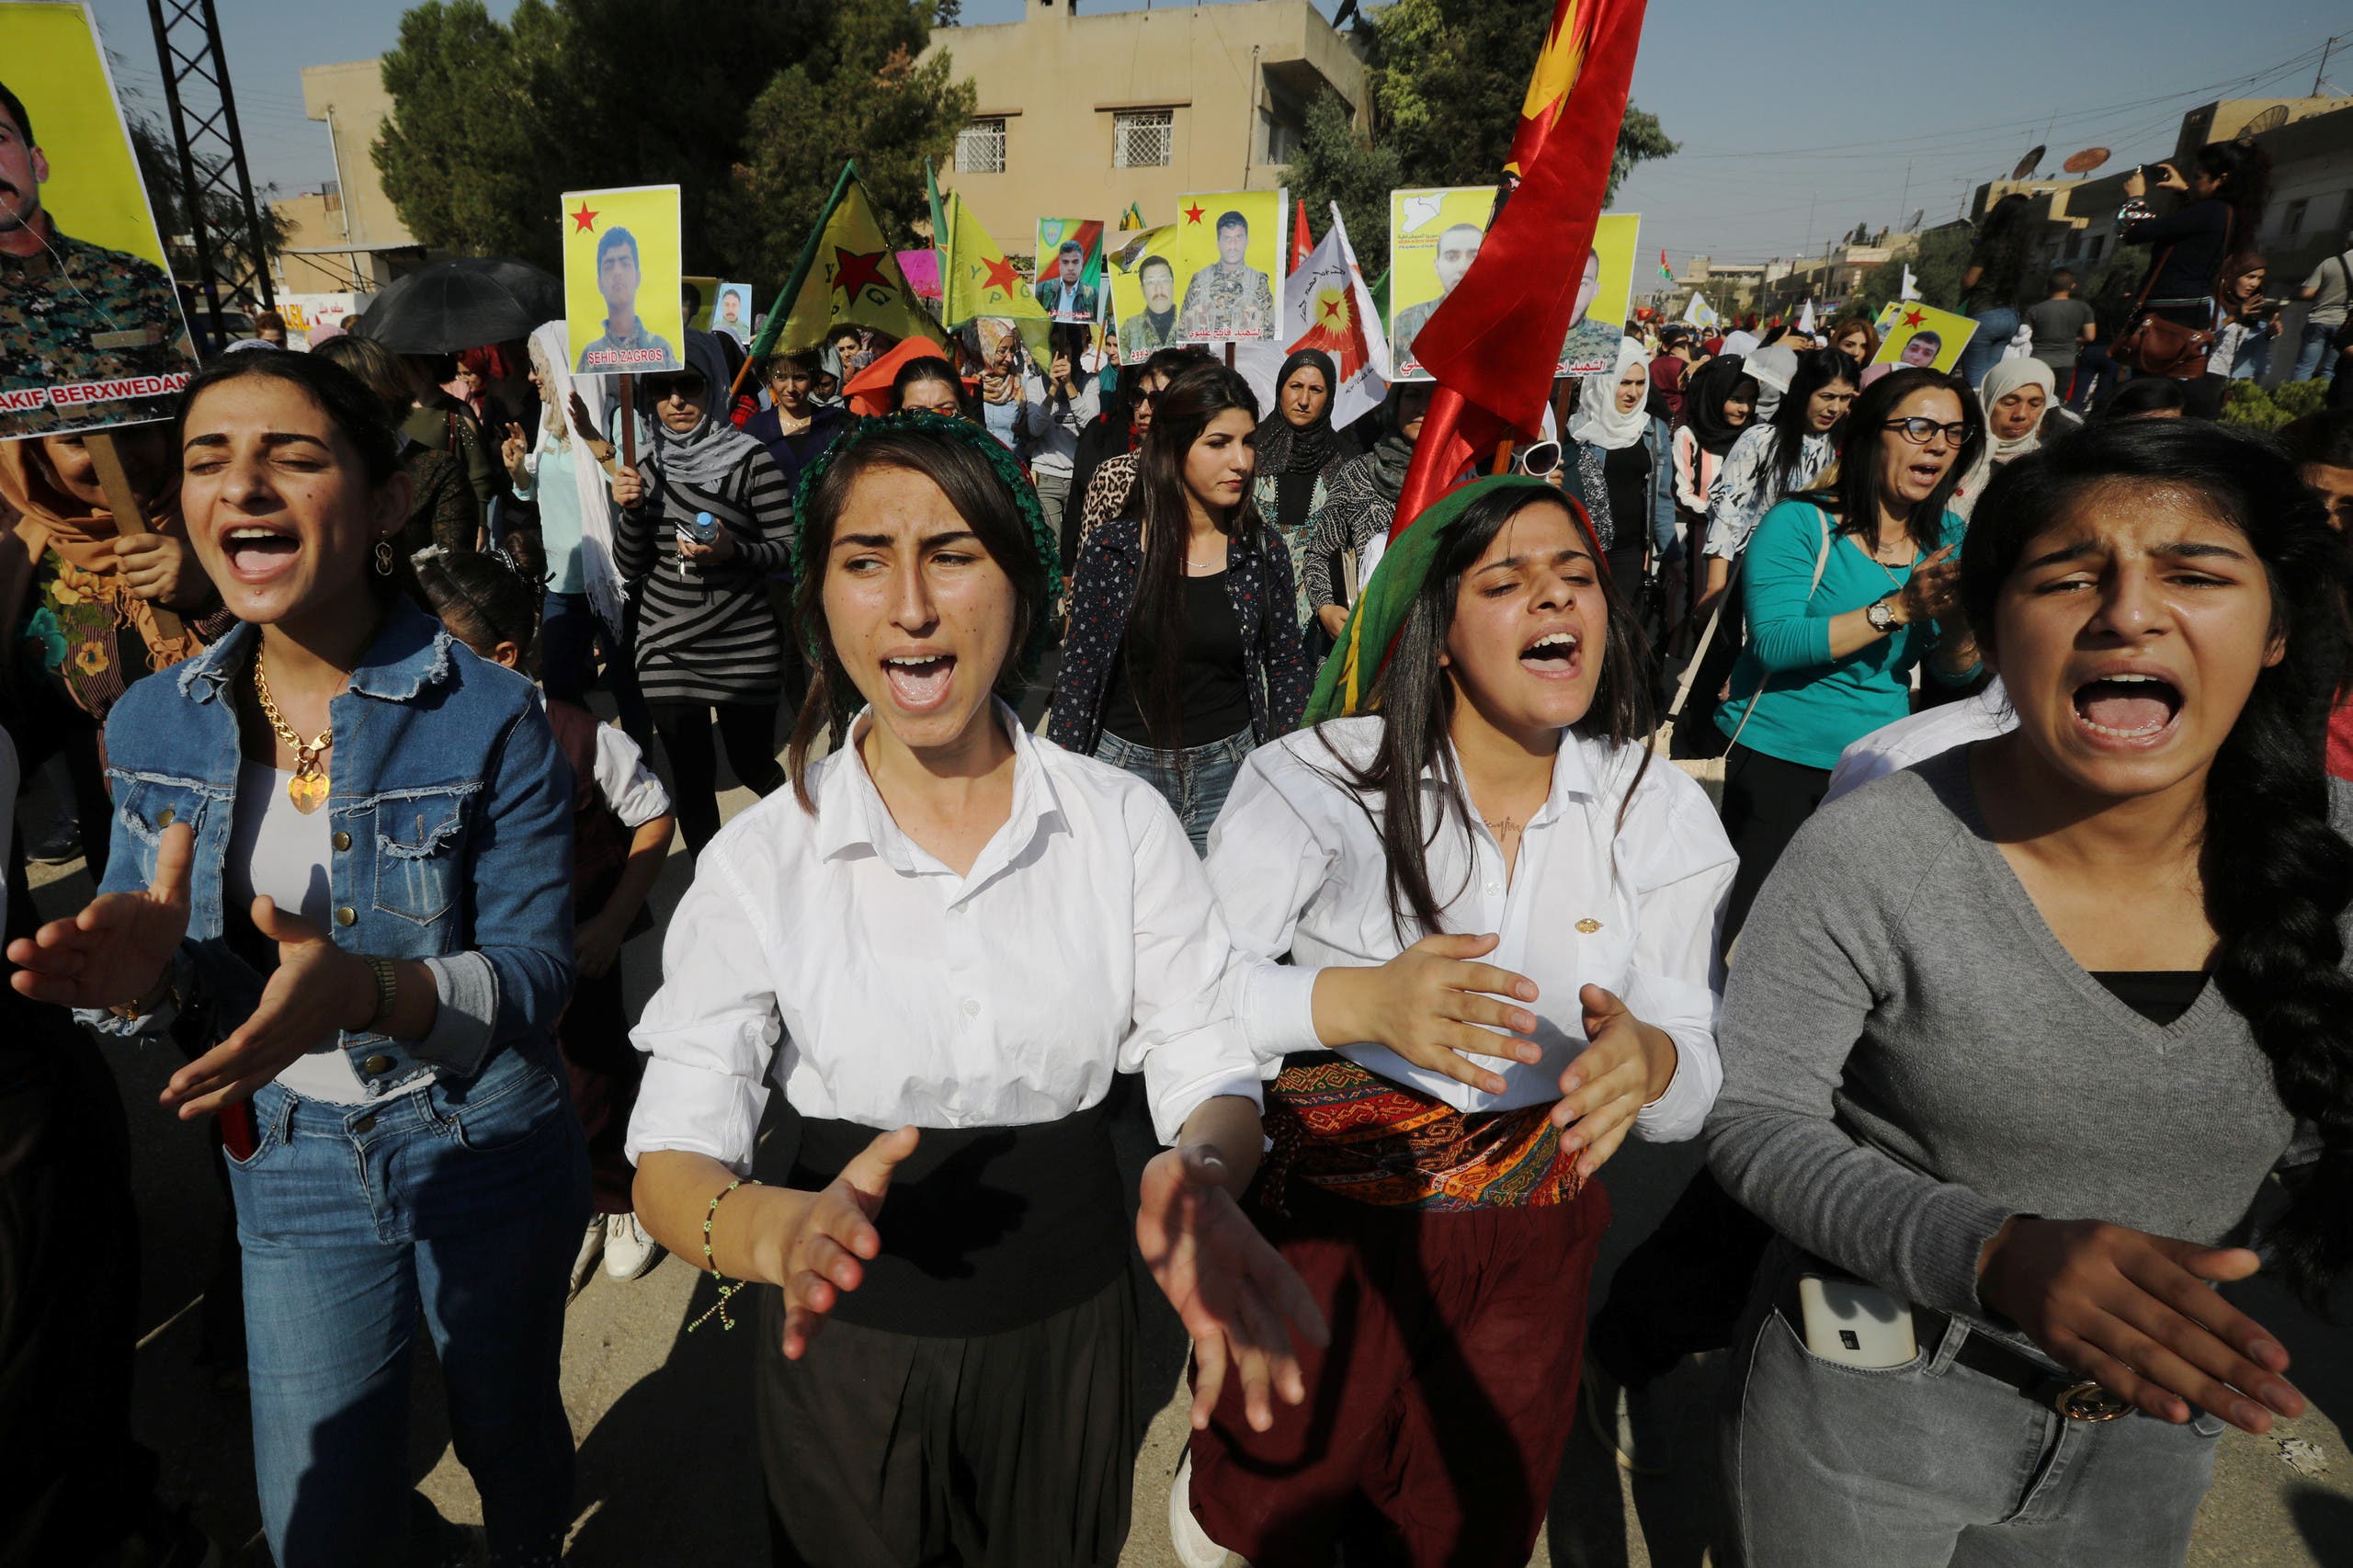 Kurdish and Arab protesters chant slogans against Turkish President Erdogan during a march to the United Nations Headquarters in the town of Qamishli, Syria. (Reuters)